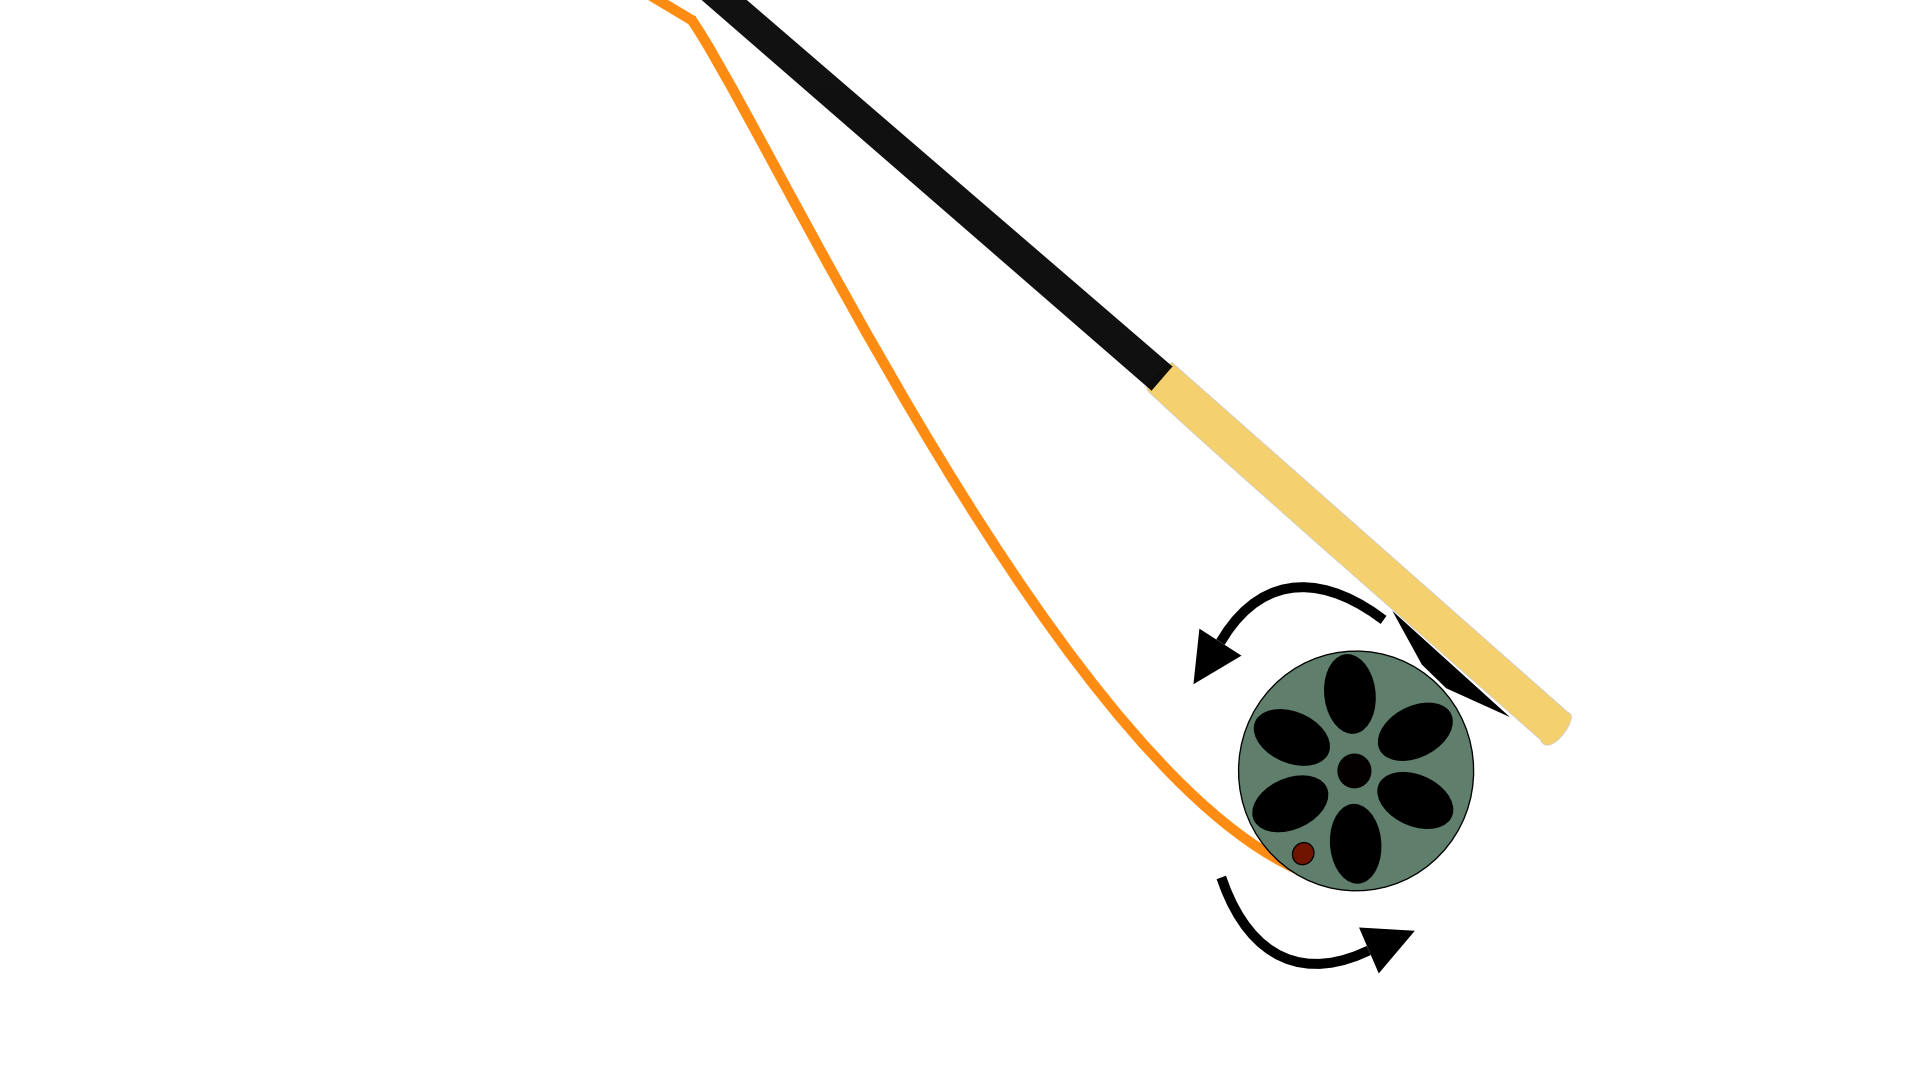 Correct direction to load and wind line onto a fly fishing reel